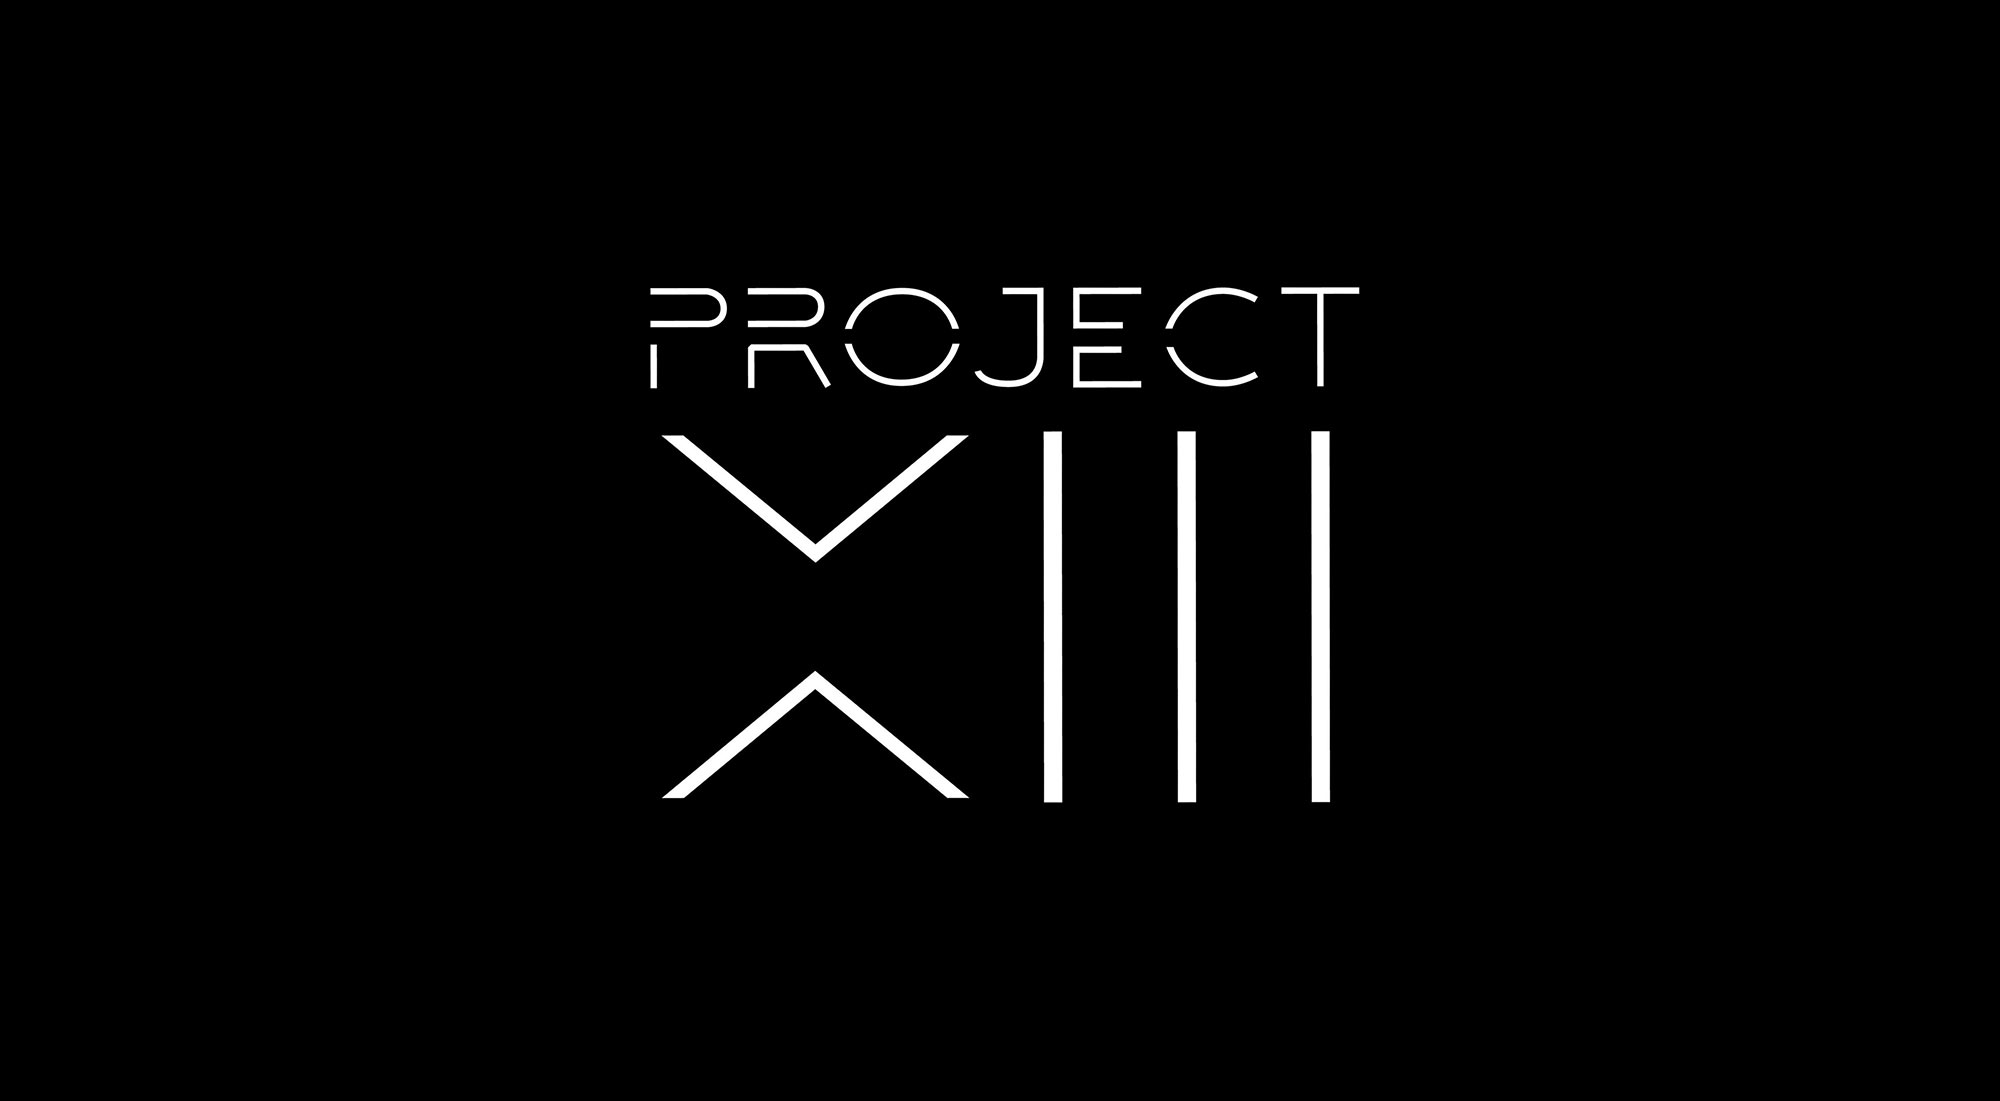 PROJECT XIII